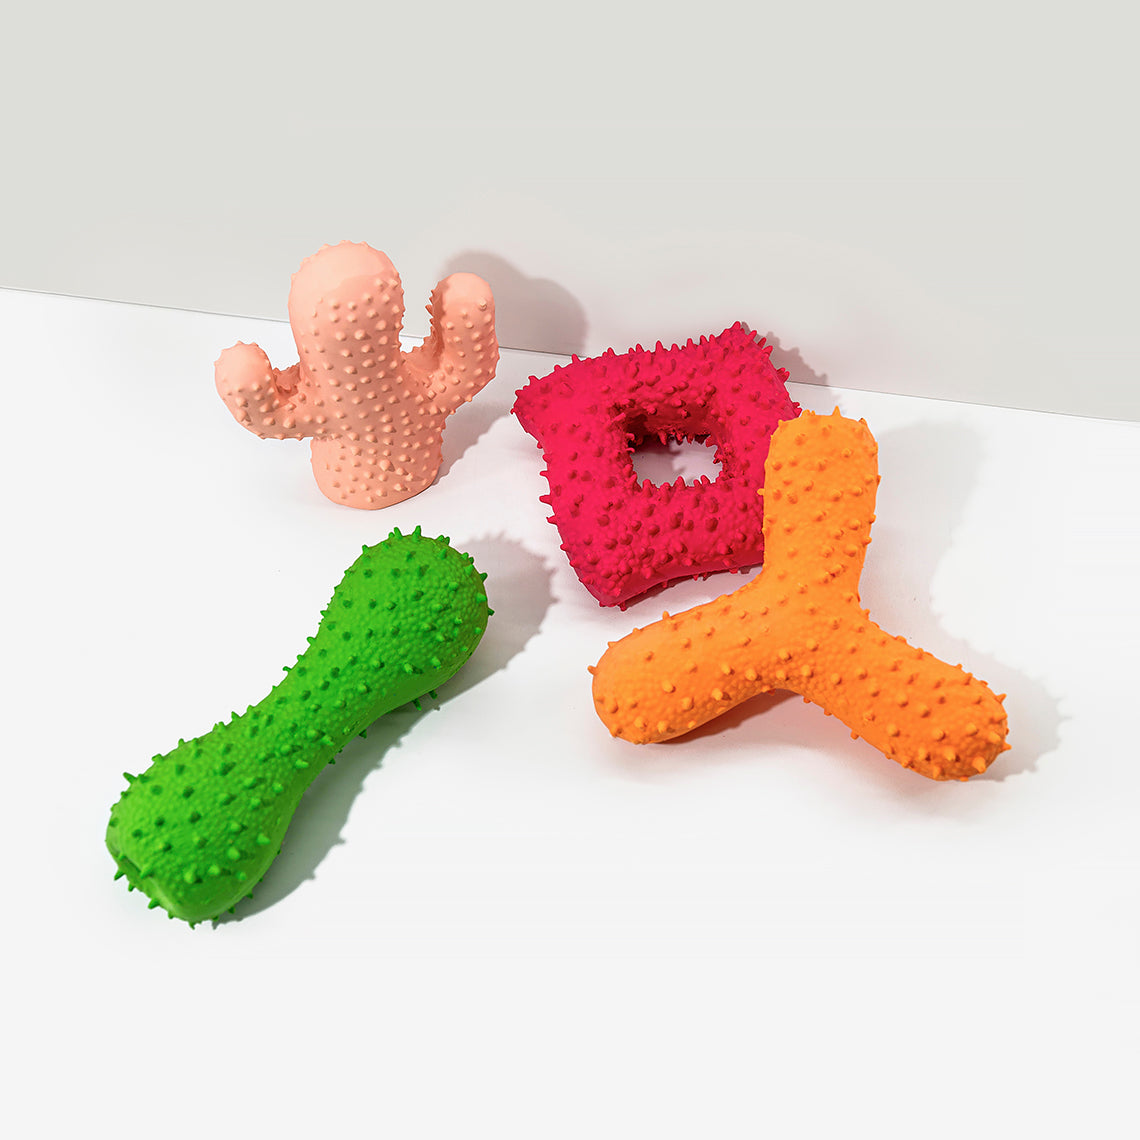 Four dog toys on the white background, include a pink cactus, a red square, a green dumbbell, and an orange boomerang.